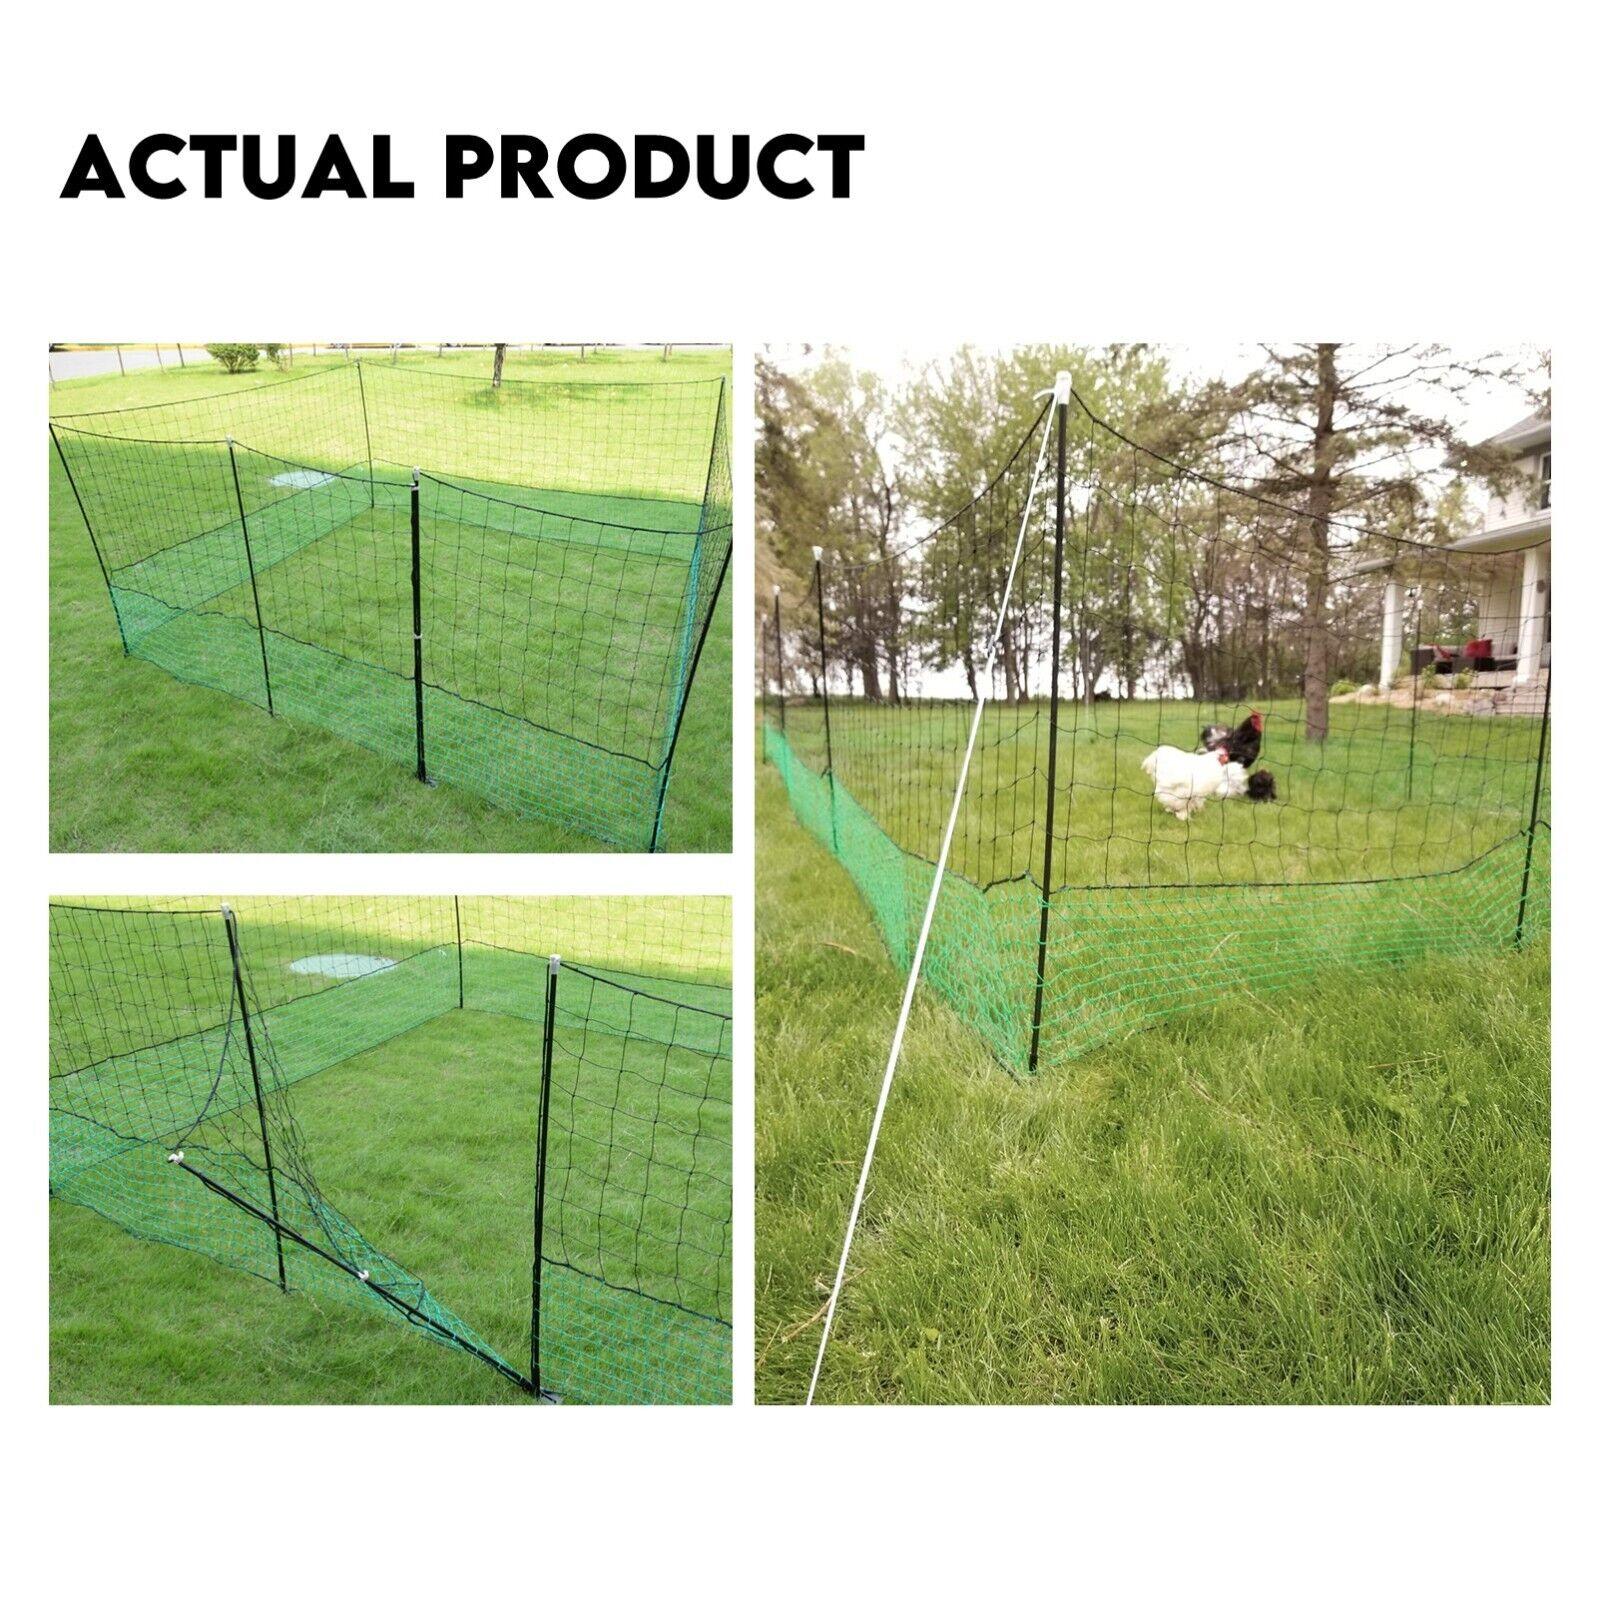 POULTRY NETTING Quality Net Chicken Electric Fence 60m X 115cm